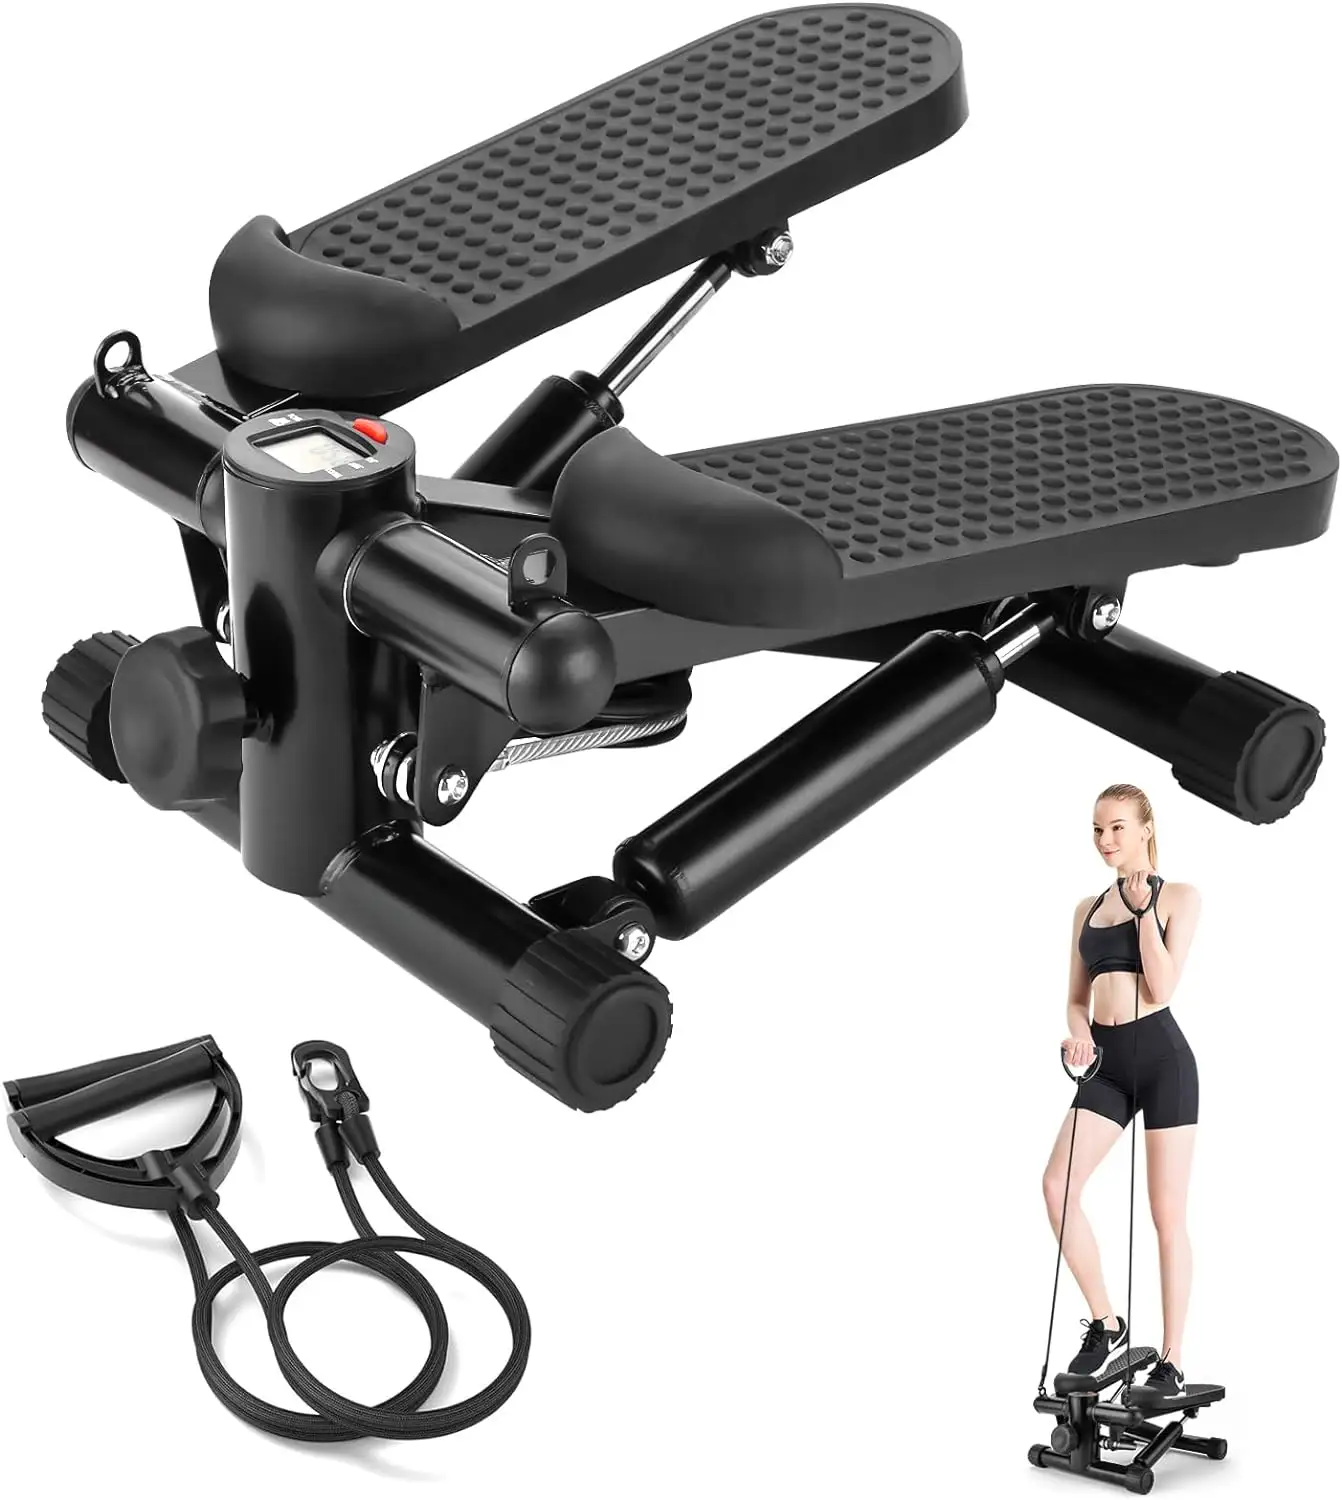 Thuis Workout Apparatuur Trap Stepper Voor Oefening Mini Steppers Met Weerstand Band Hydraulische Fitness Stepper